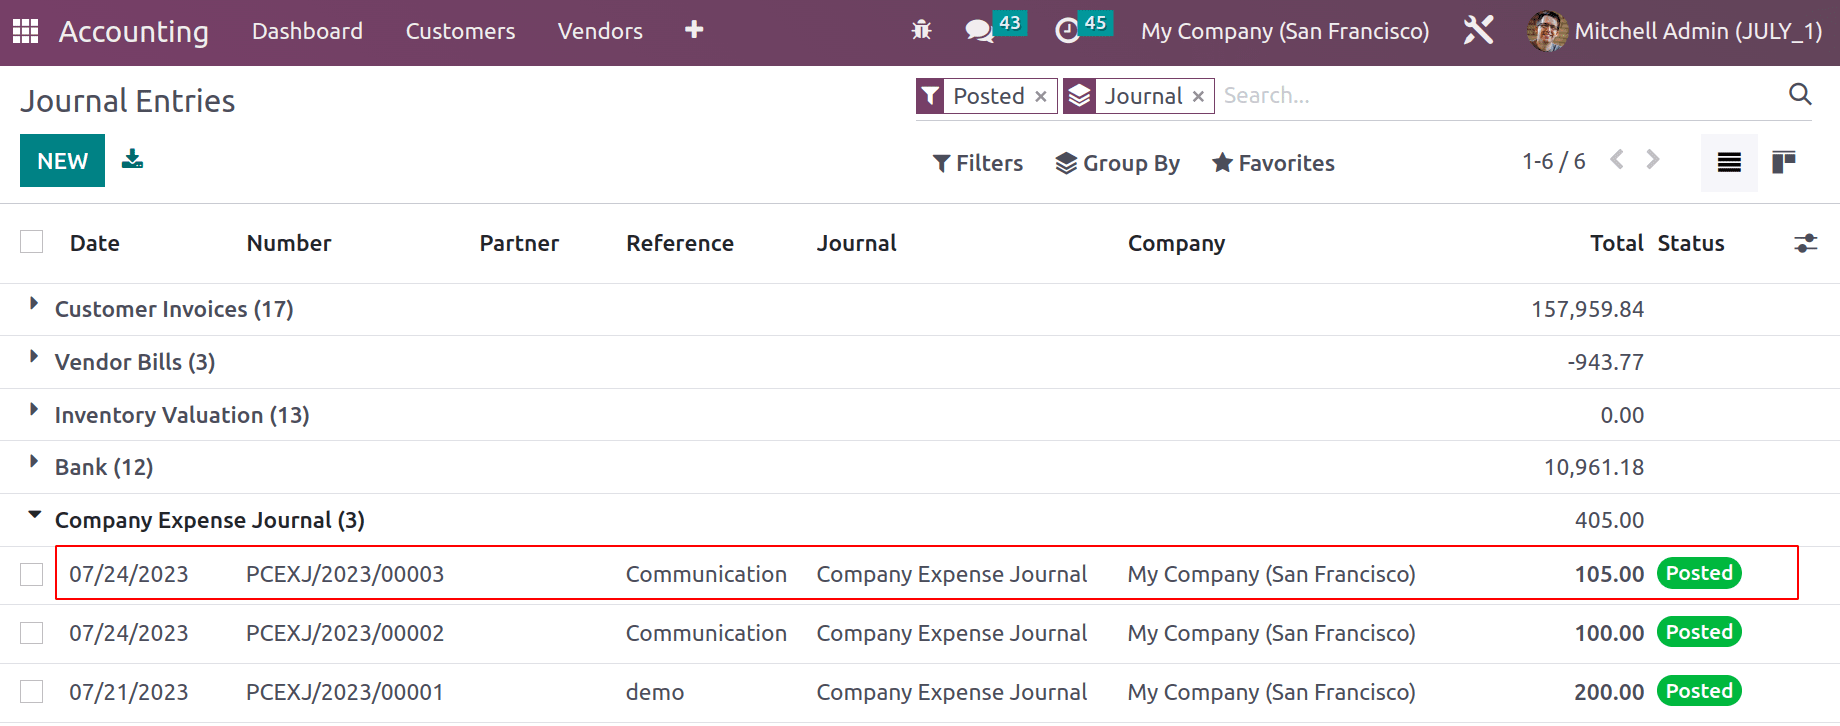 How to Manage your Expense with odoo 16 Expenses App-cybrosys